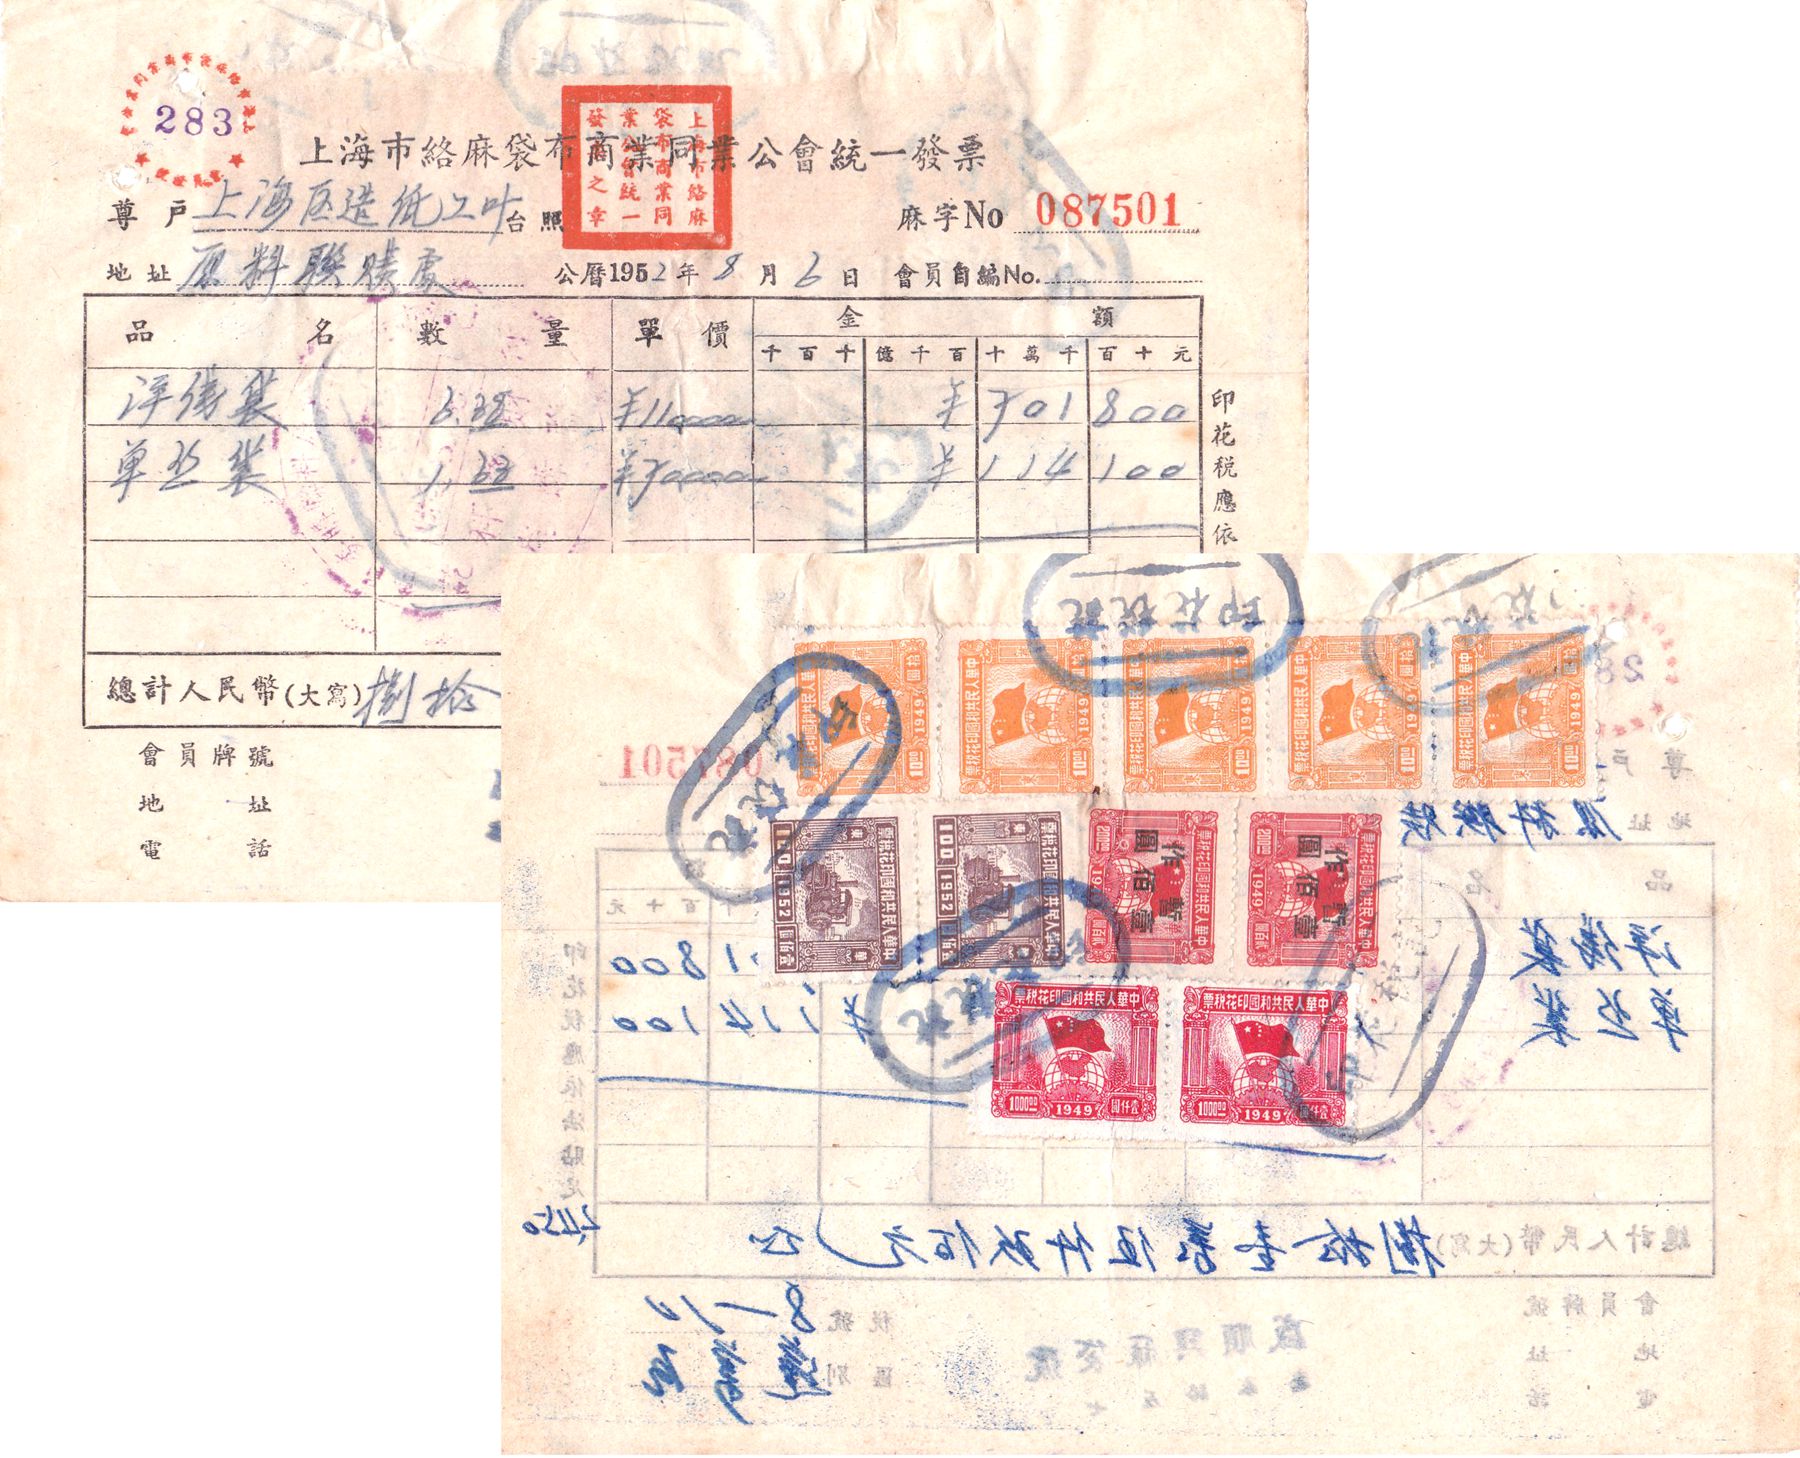 R2919, Shanghai Company Receipt of 1952, with 11 pcs Revenue Stamps